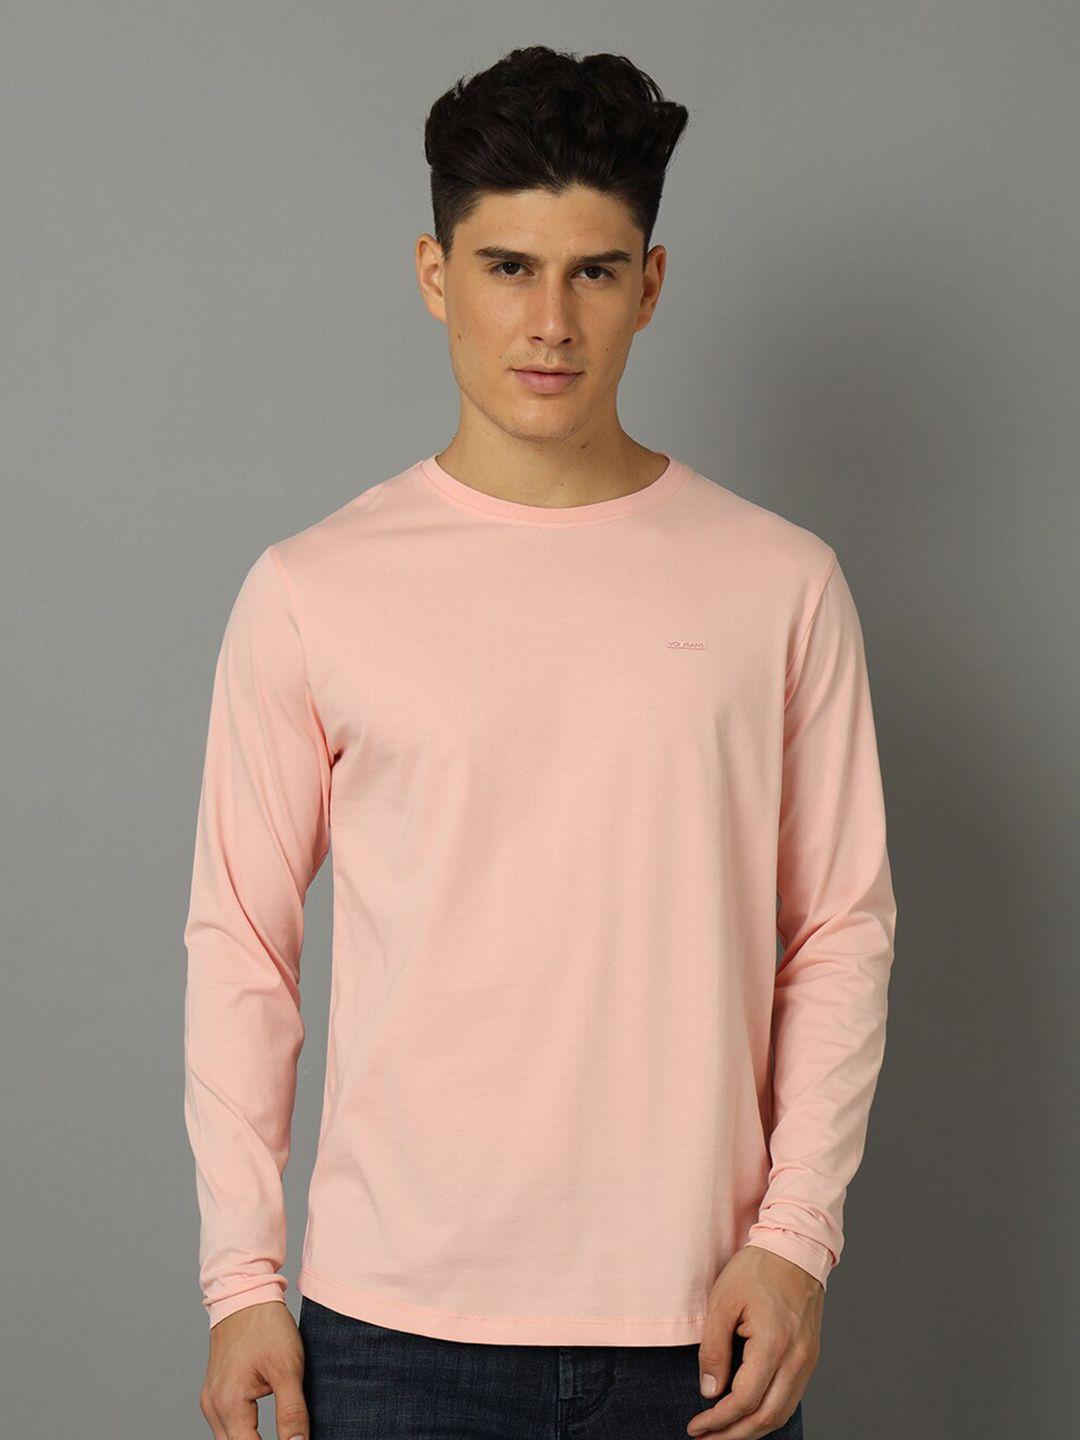 voi jeans round neck long sleeves  t-shirt